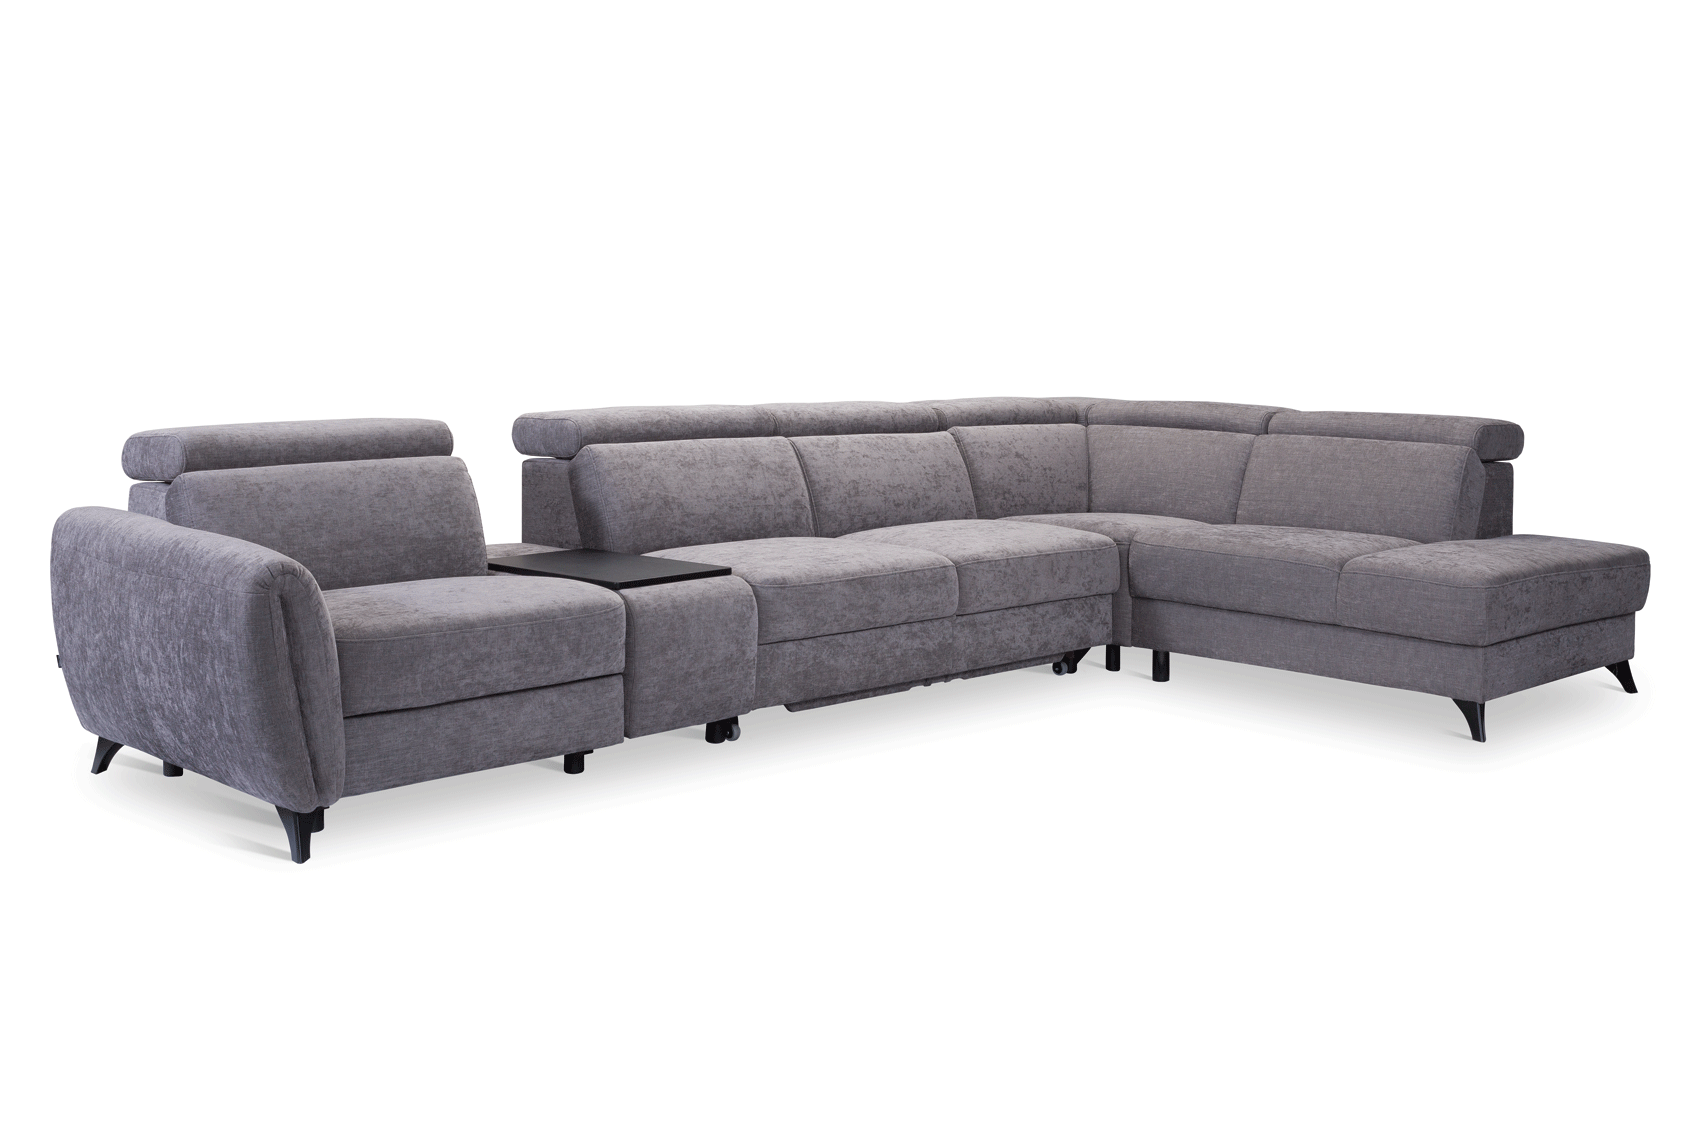 Living Room Furniture Sleepers Sofas Loveseats and Chairs Lorens Sectional w/recliner, bed, bar